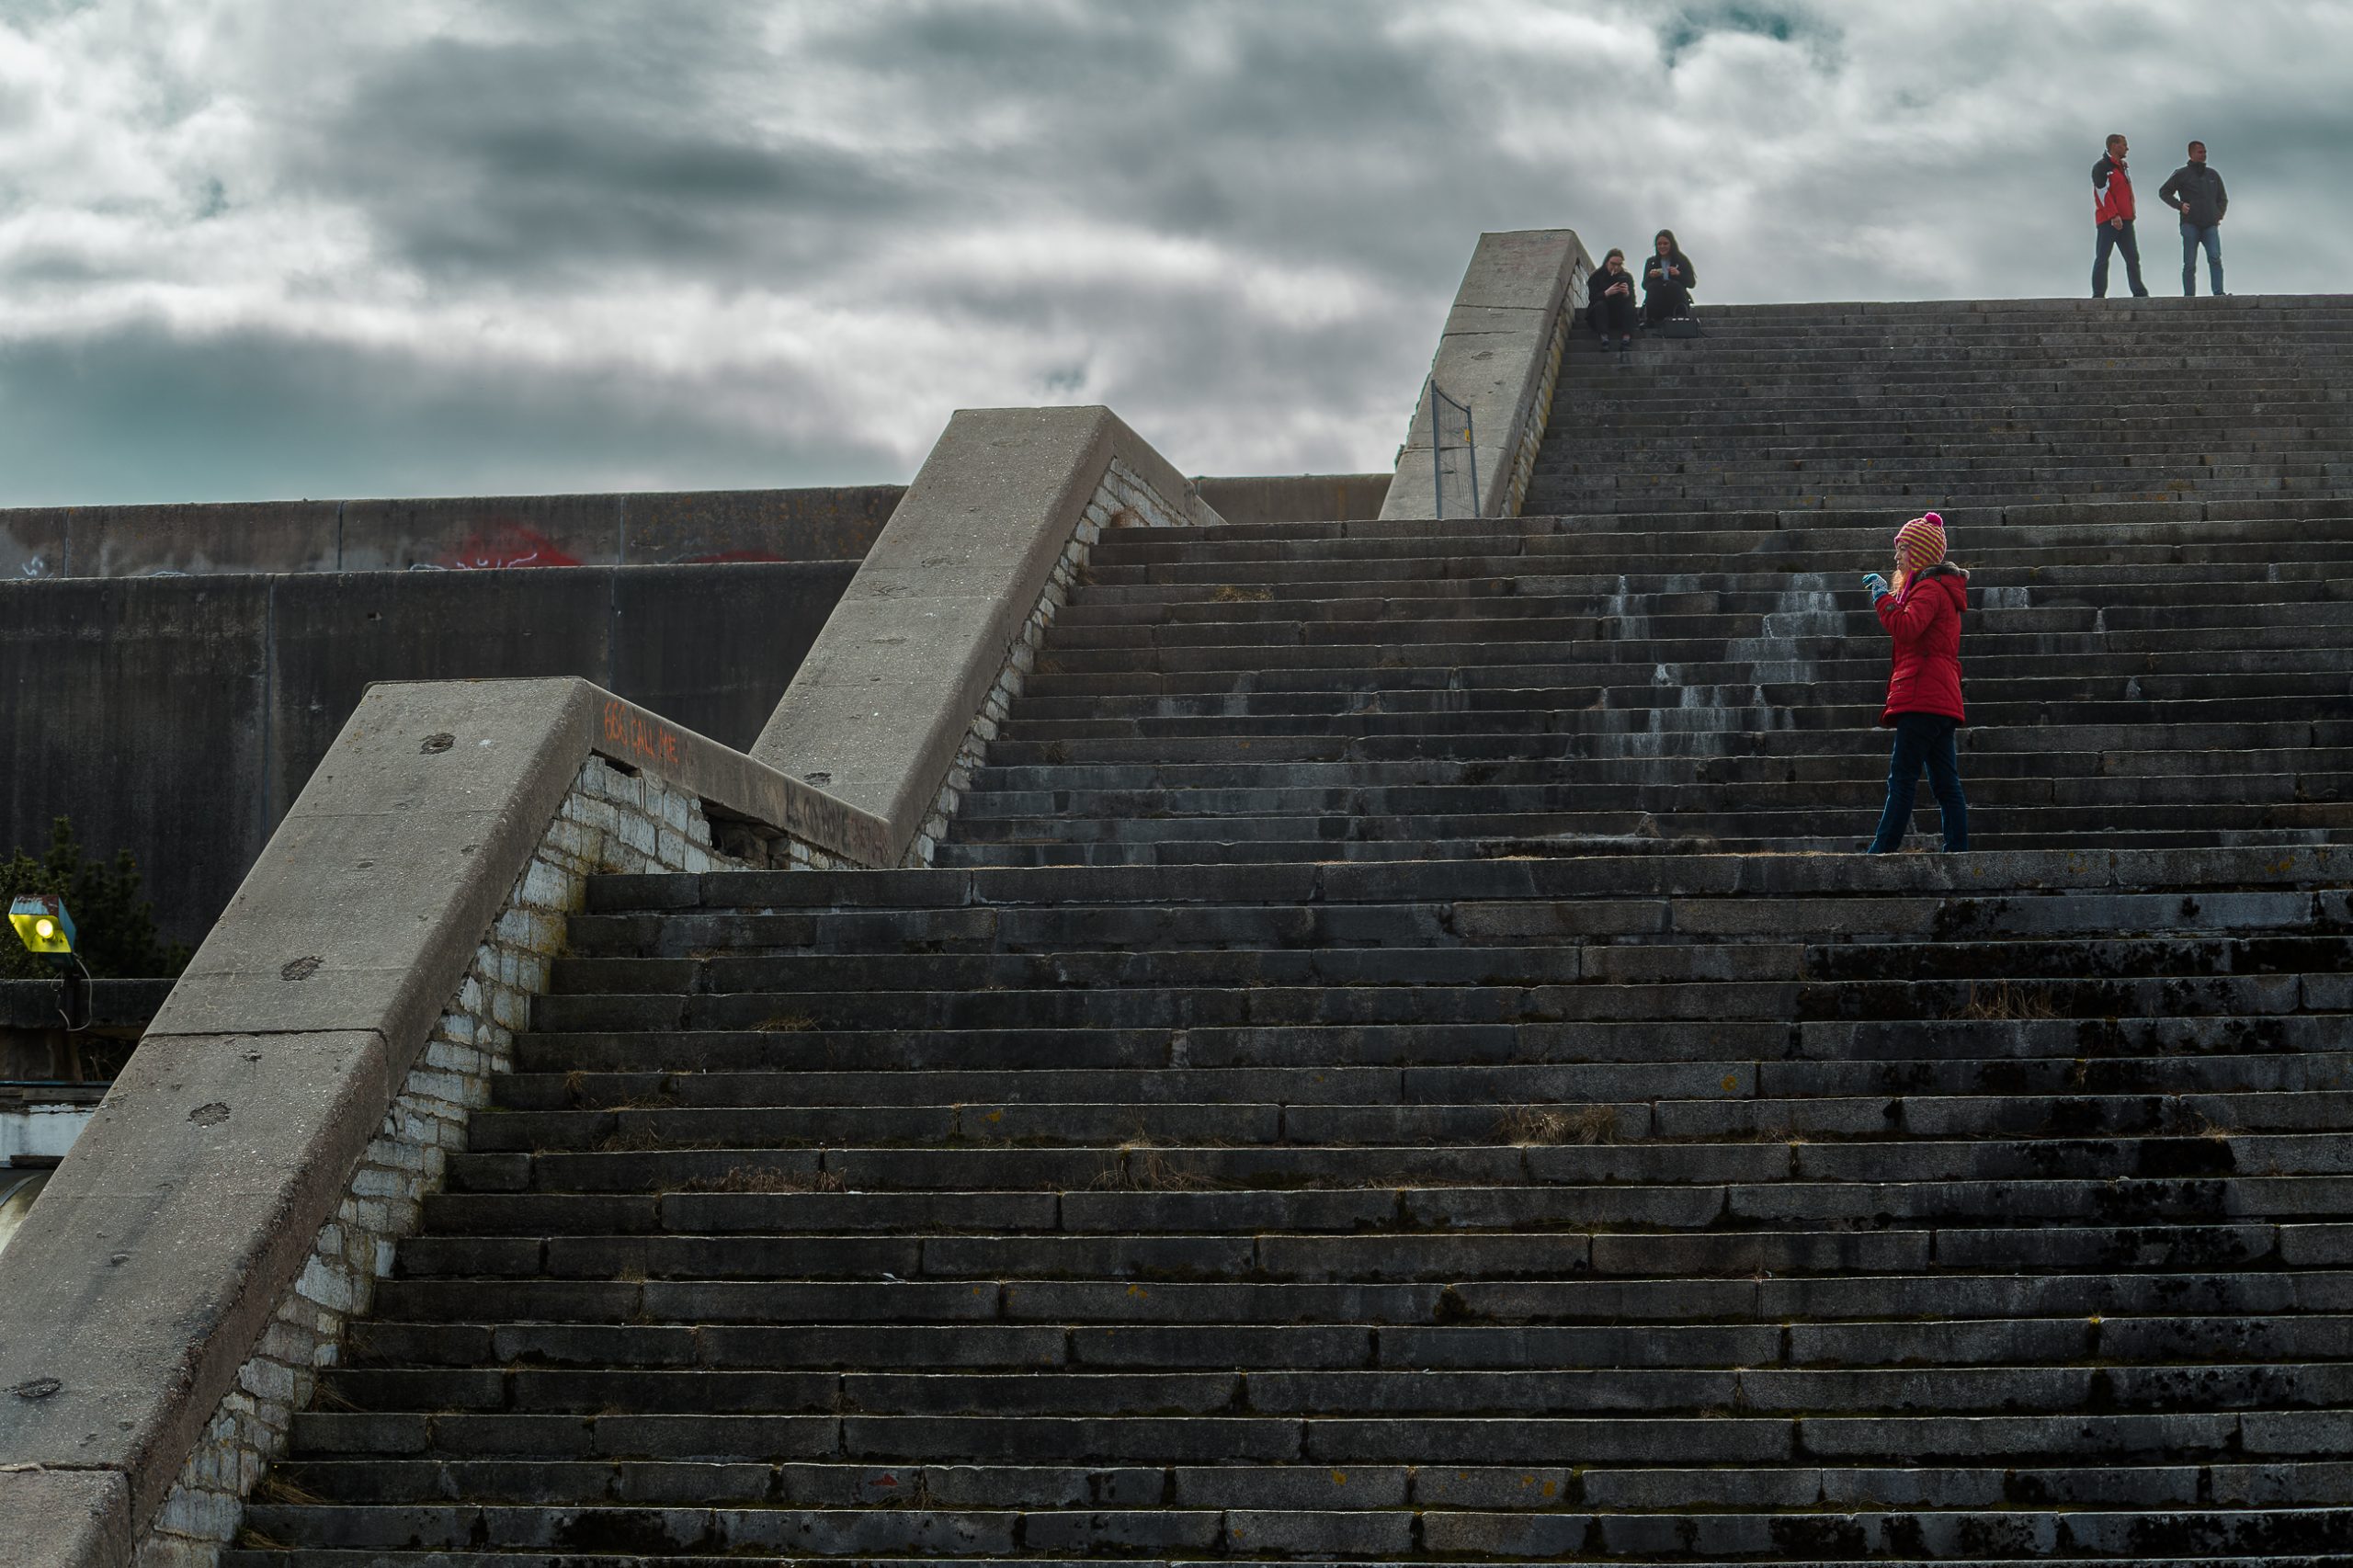 Approaching the Linnahall from the north. Three long tiers of stairs lead to the roof. On one of them a young girl in a red coat and wool hat pauses to look around